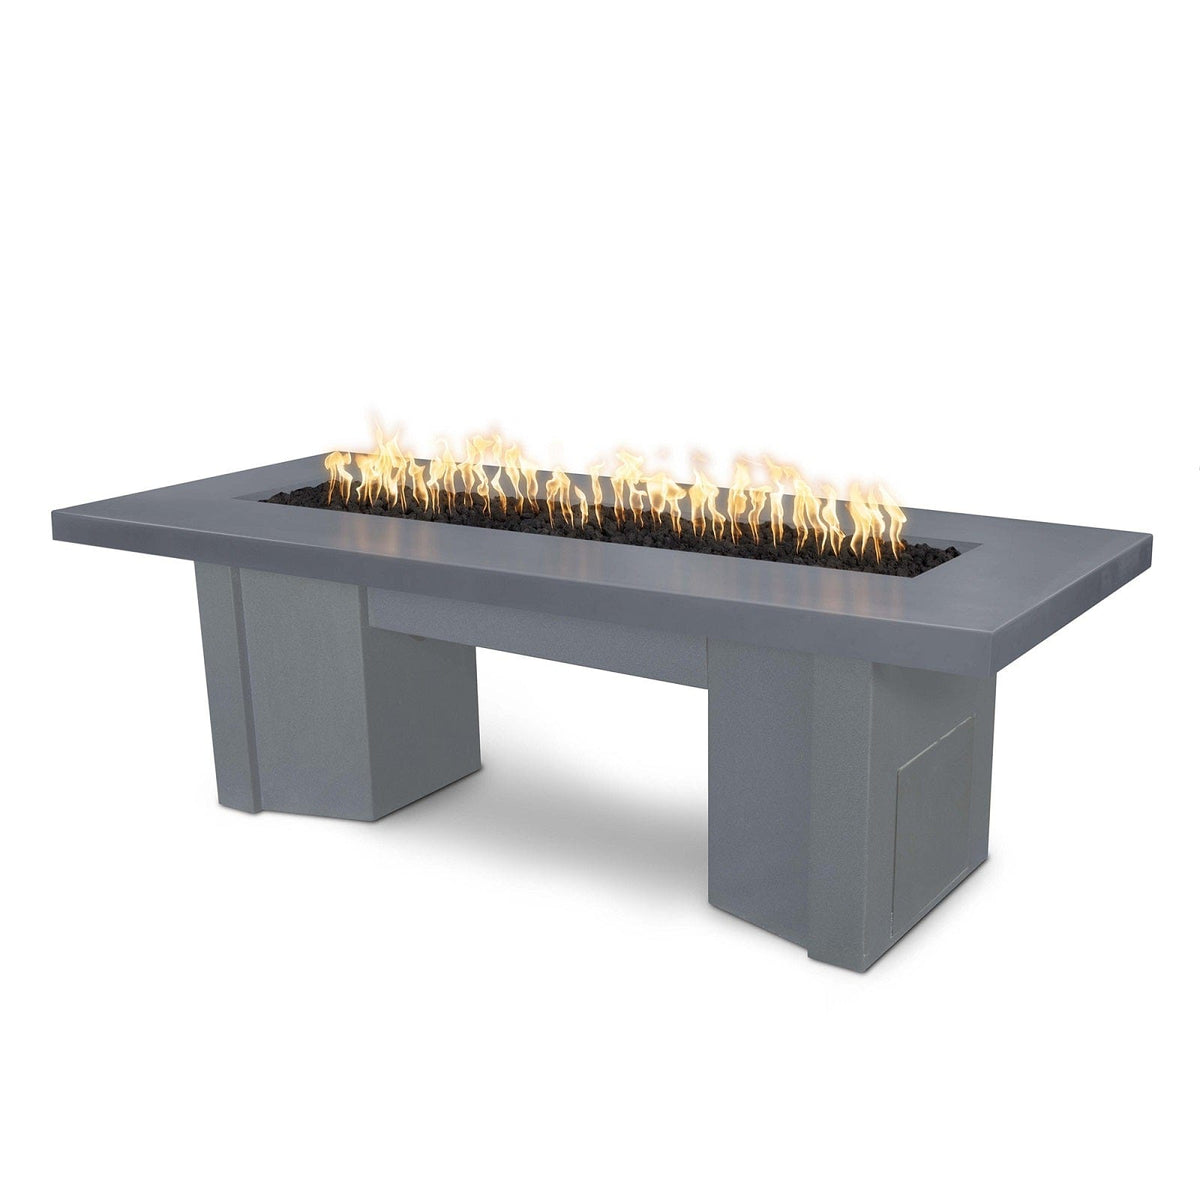 The Outdoor Plus Fire Features Gray (-GRY) / Gray Powder Coated Steel (-GRY) The Outdoor Plus 78&quot; Alameda Fire Table Smooth Concrete in Liquid Propane - Match Lit / OPT-ALMGFRC78-LP